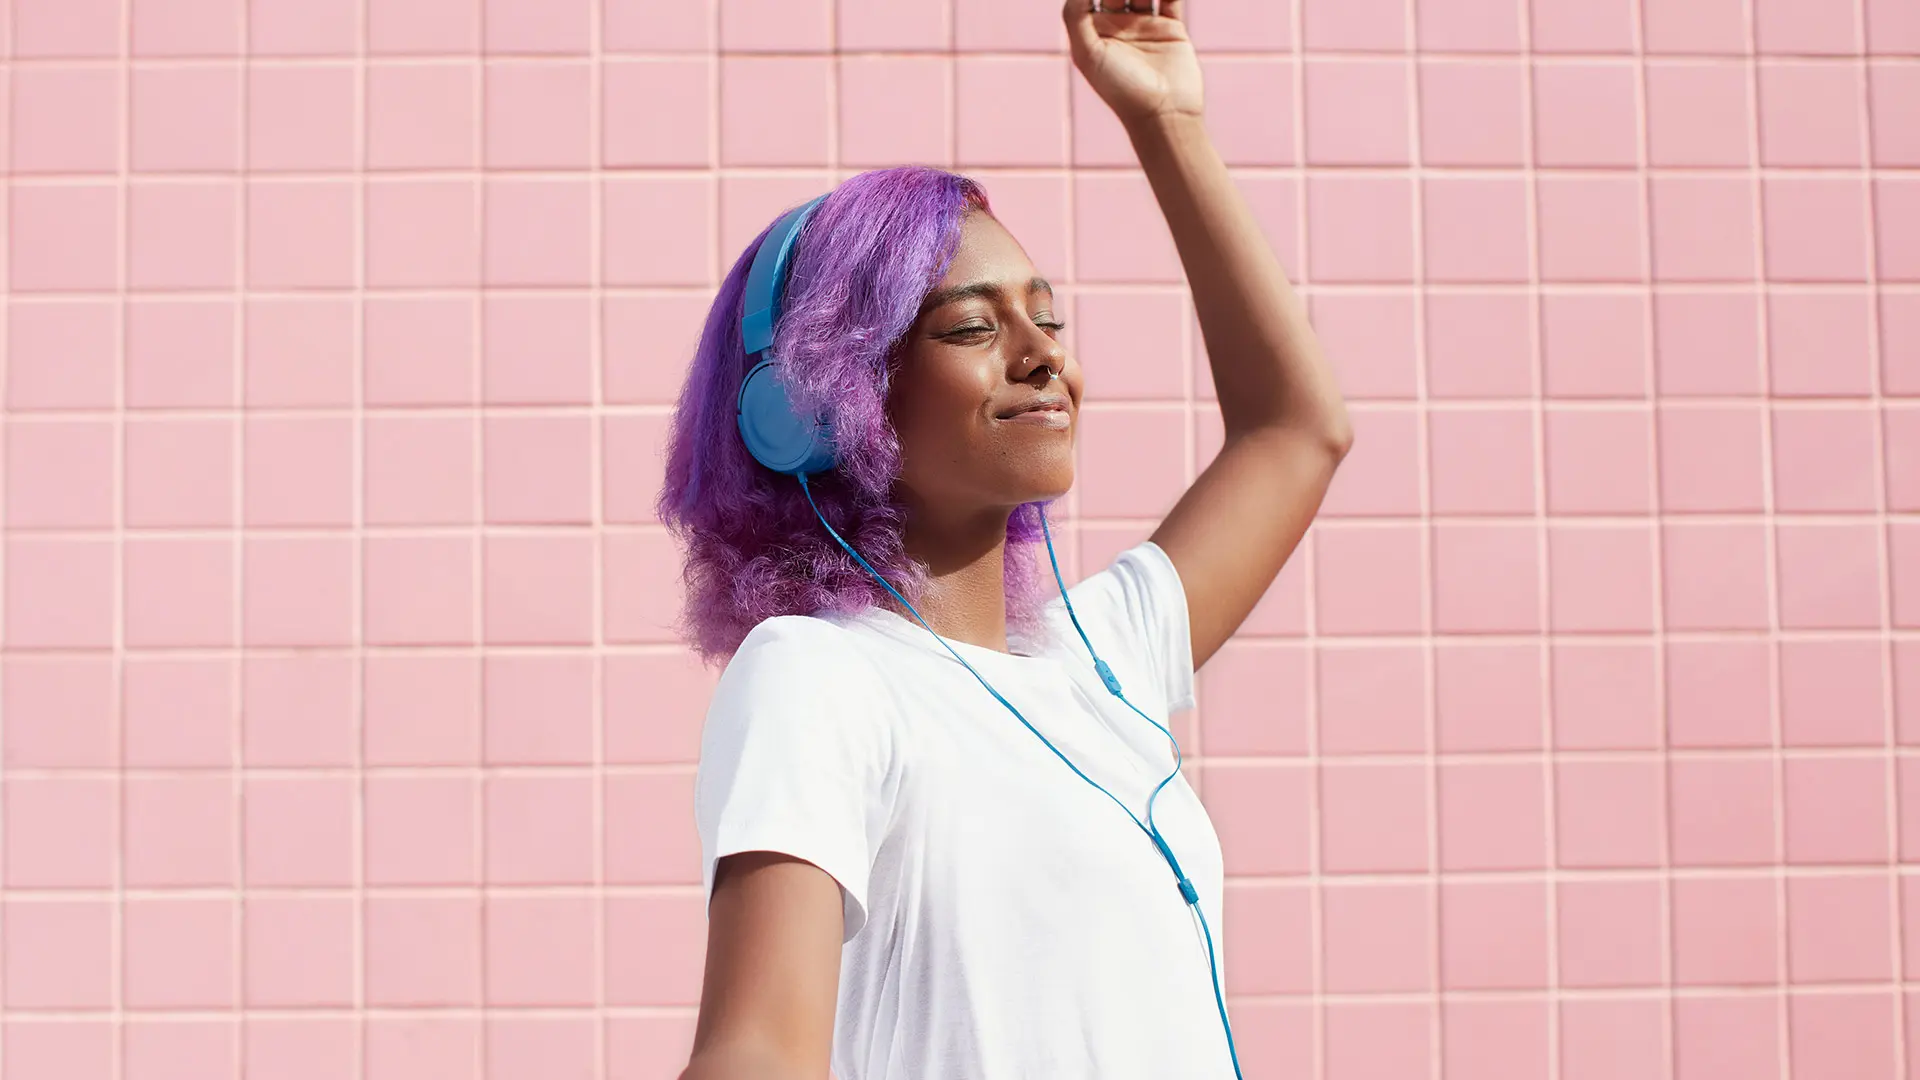 Woman with colourful hair listens to music